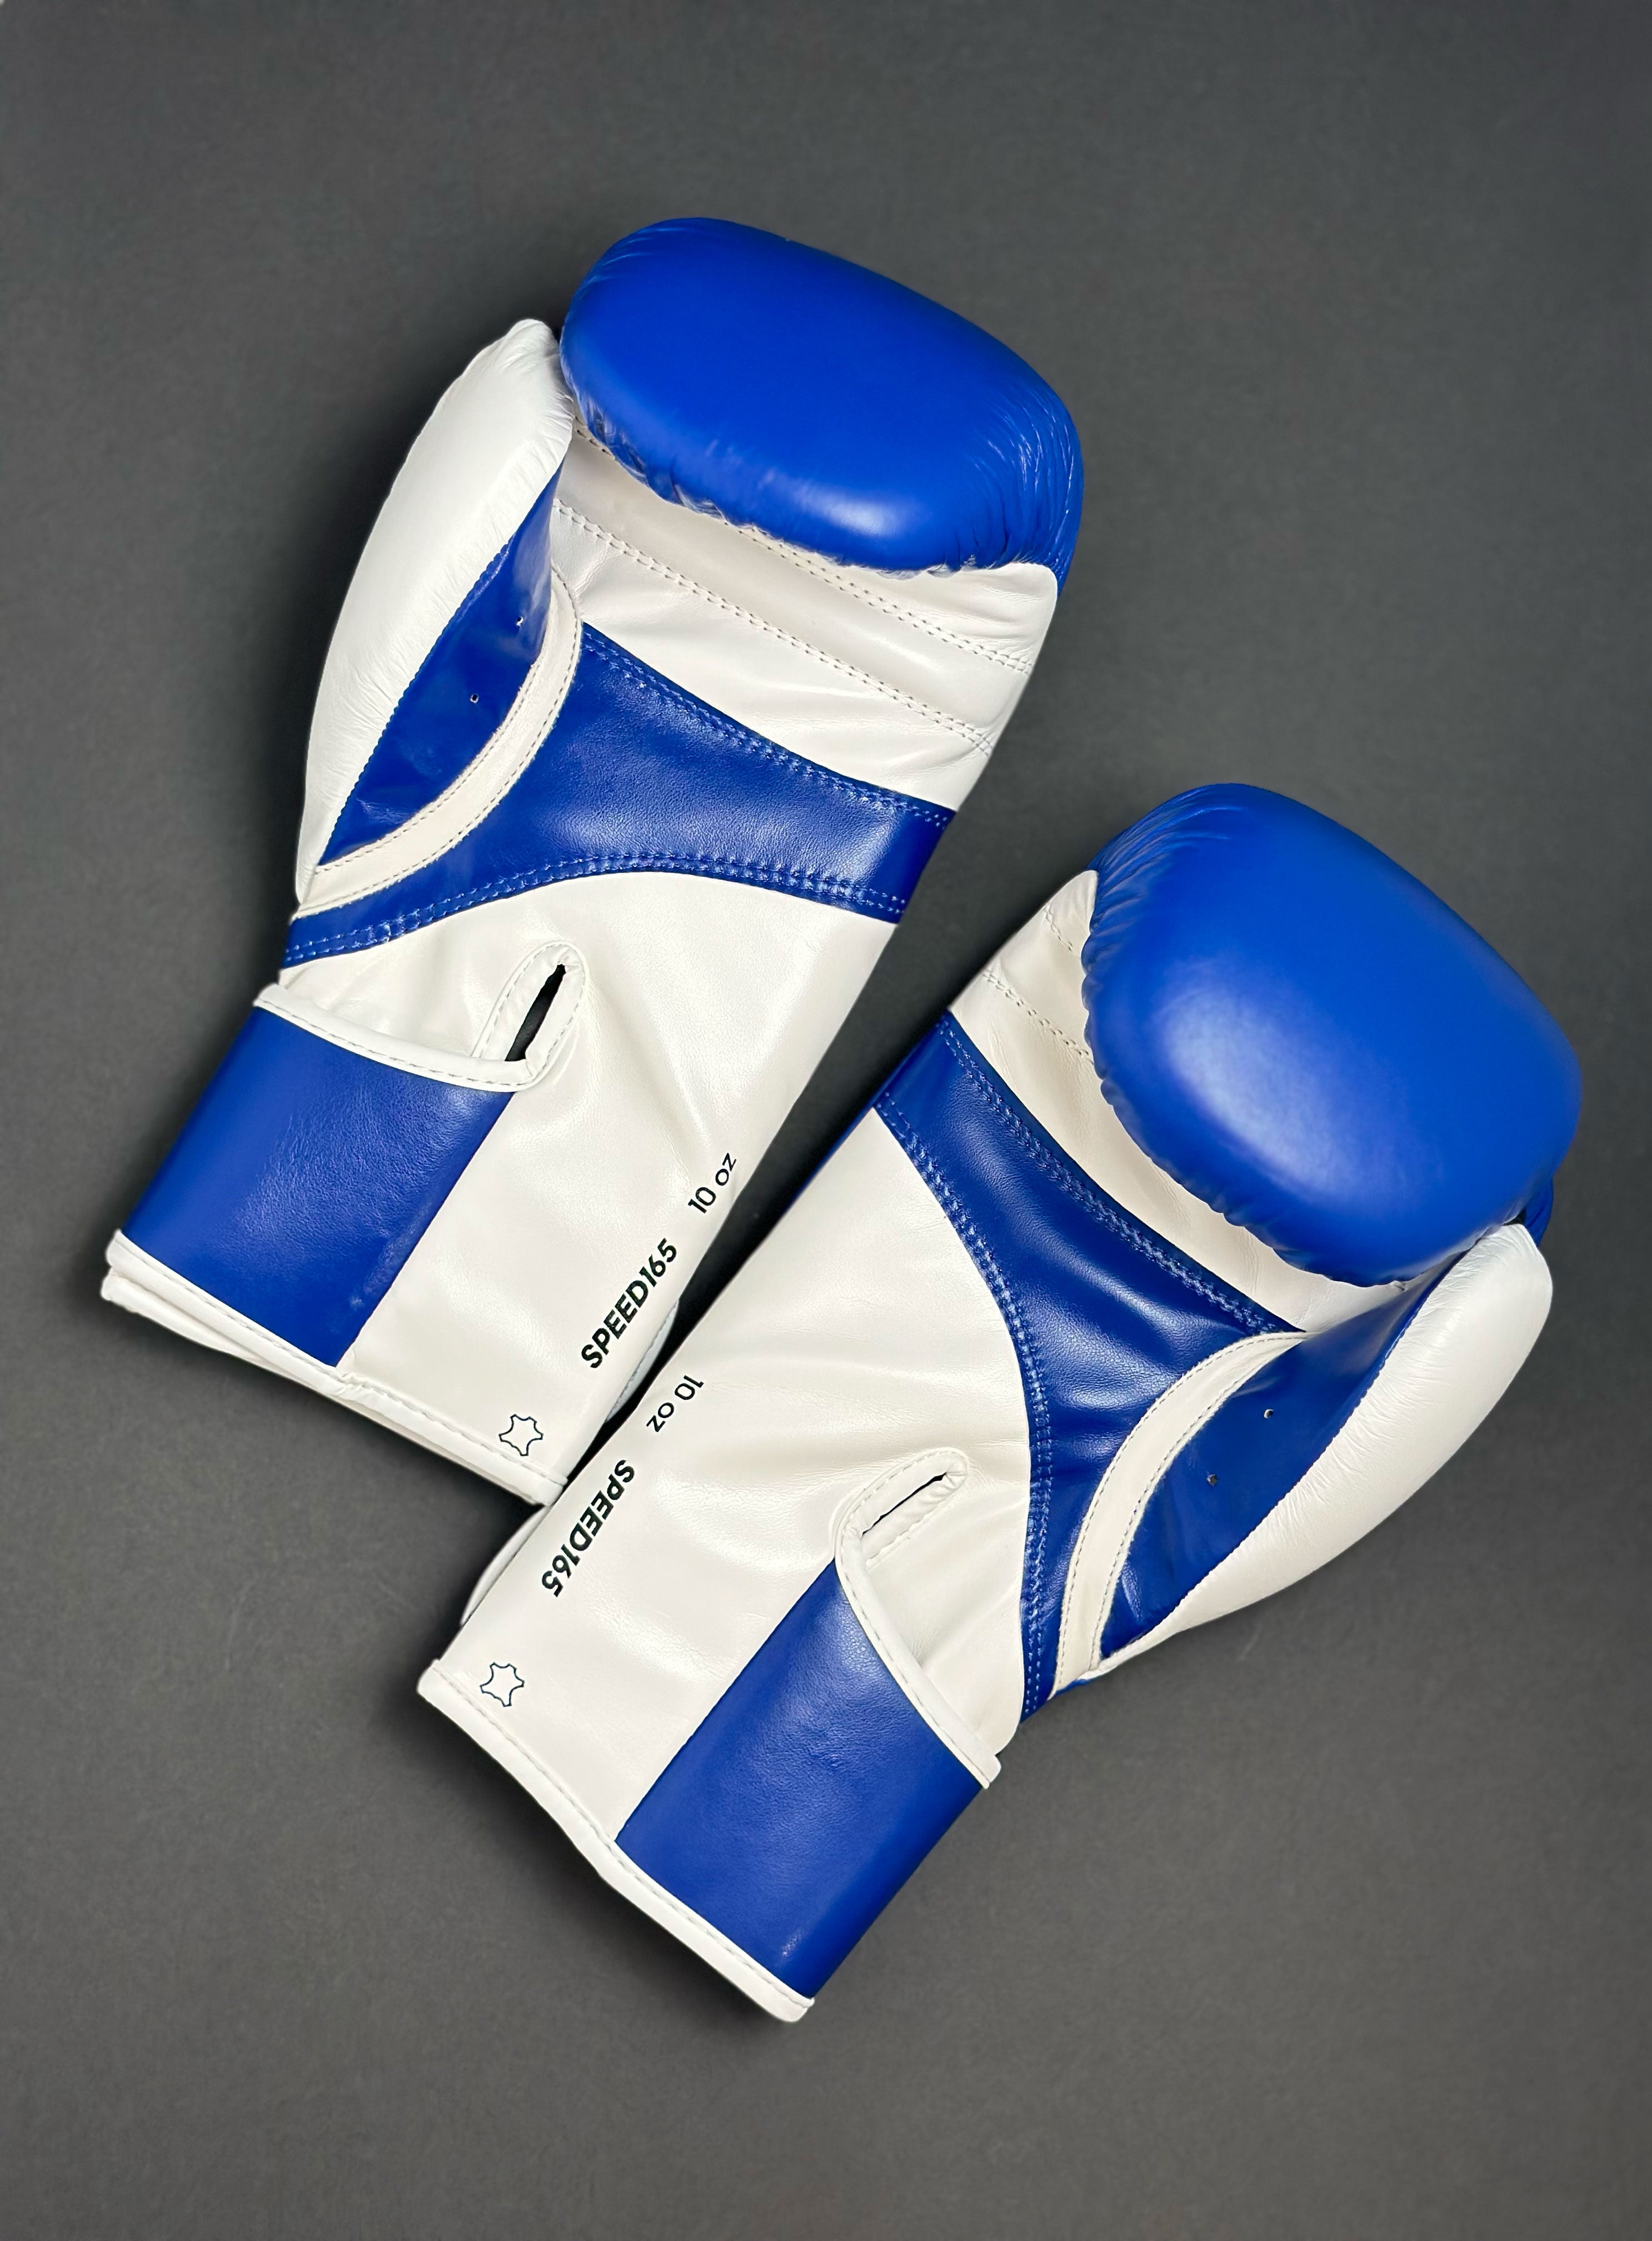 Adidas WAKO Approved Kickboxing Fight Gloves, Cowhide Cuir Leather Speed 165 adiSBG165 Competition Gloves 10 Oz Blue pair on Floor